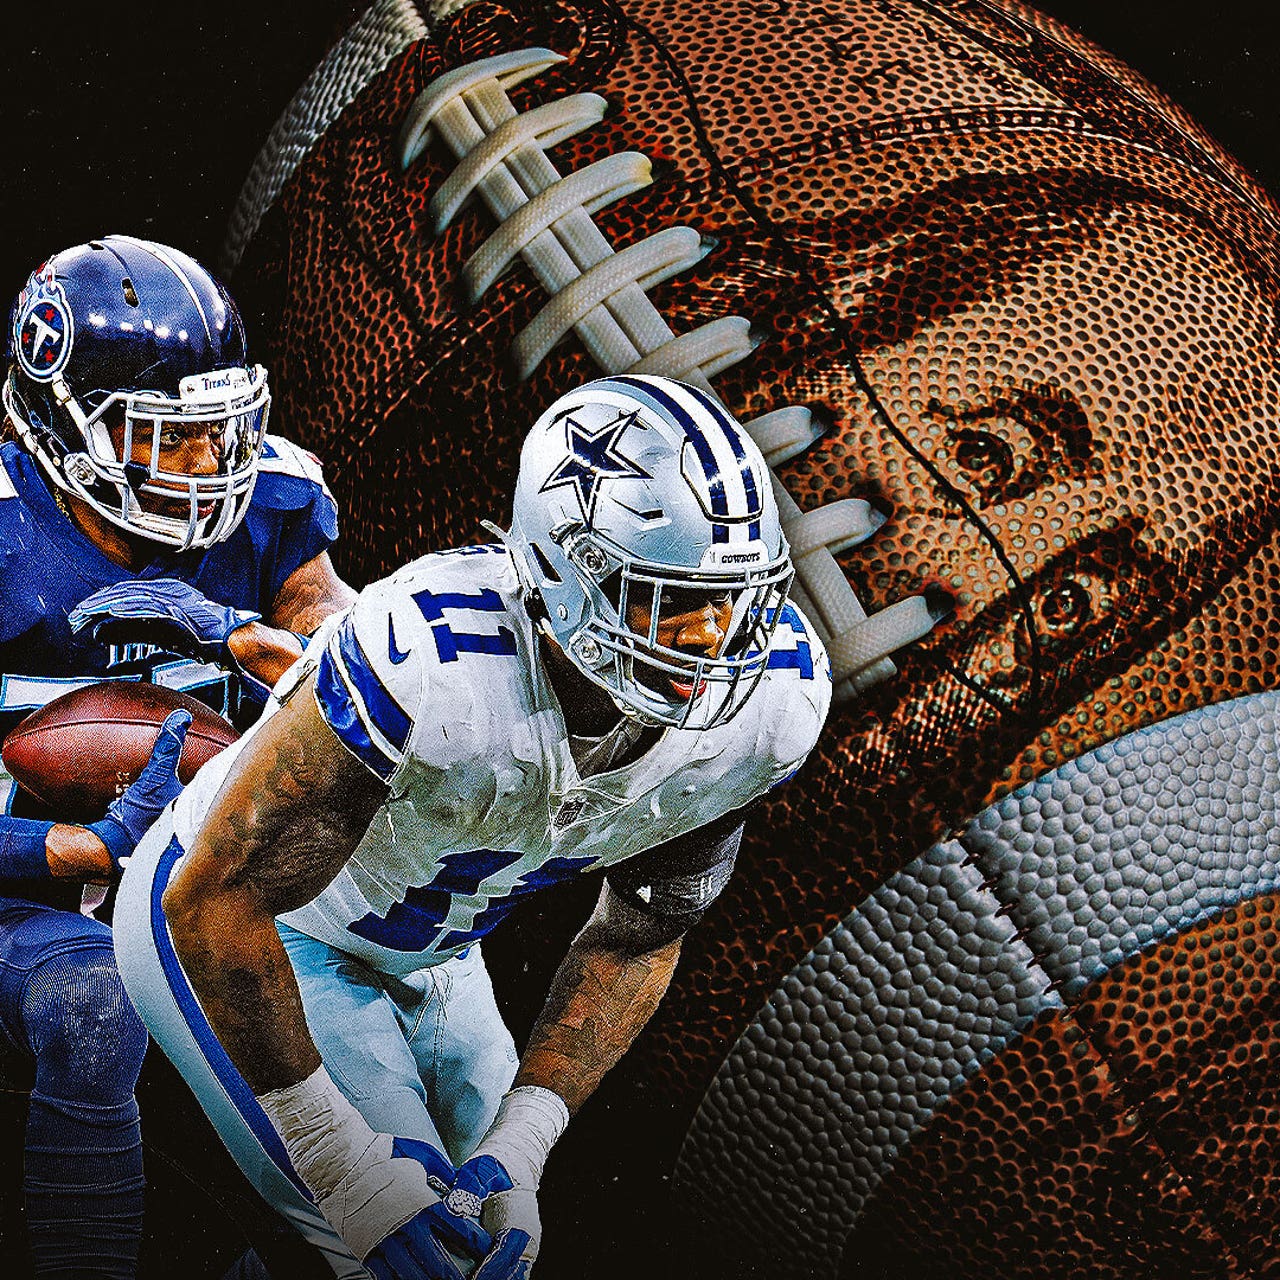 Opening NFL Week 18 betting lines, odds and spreads